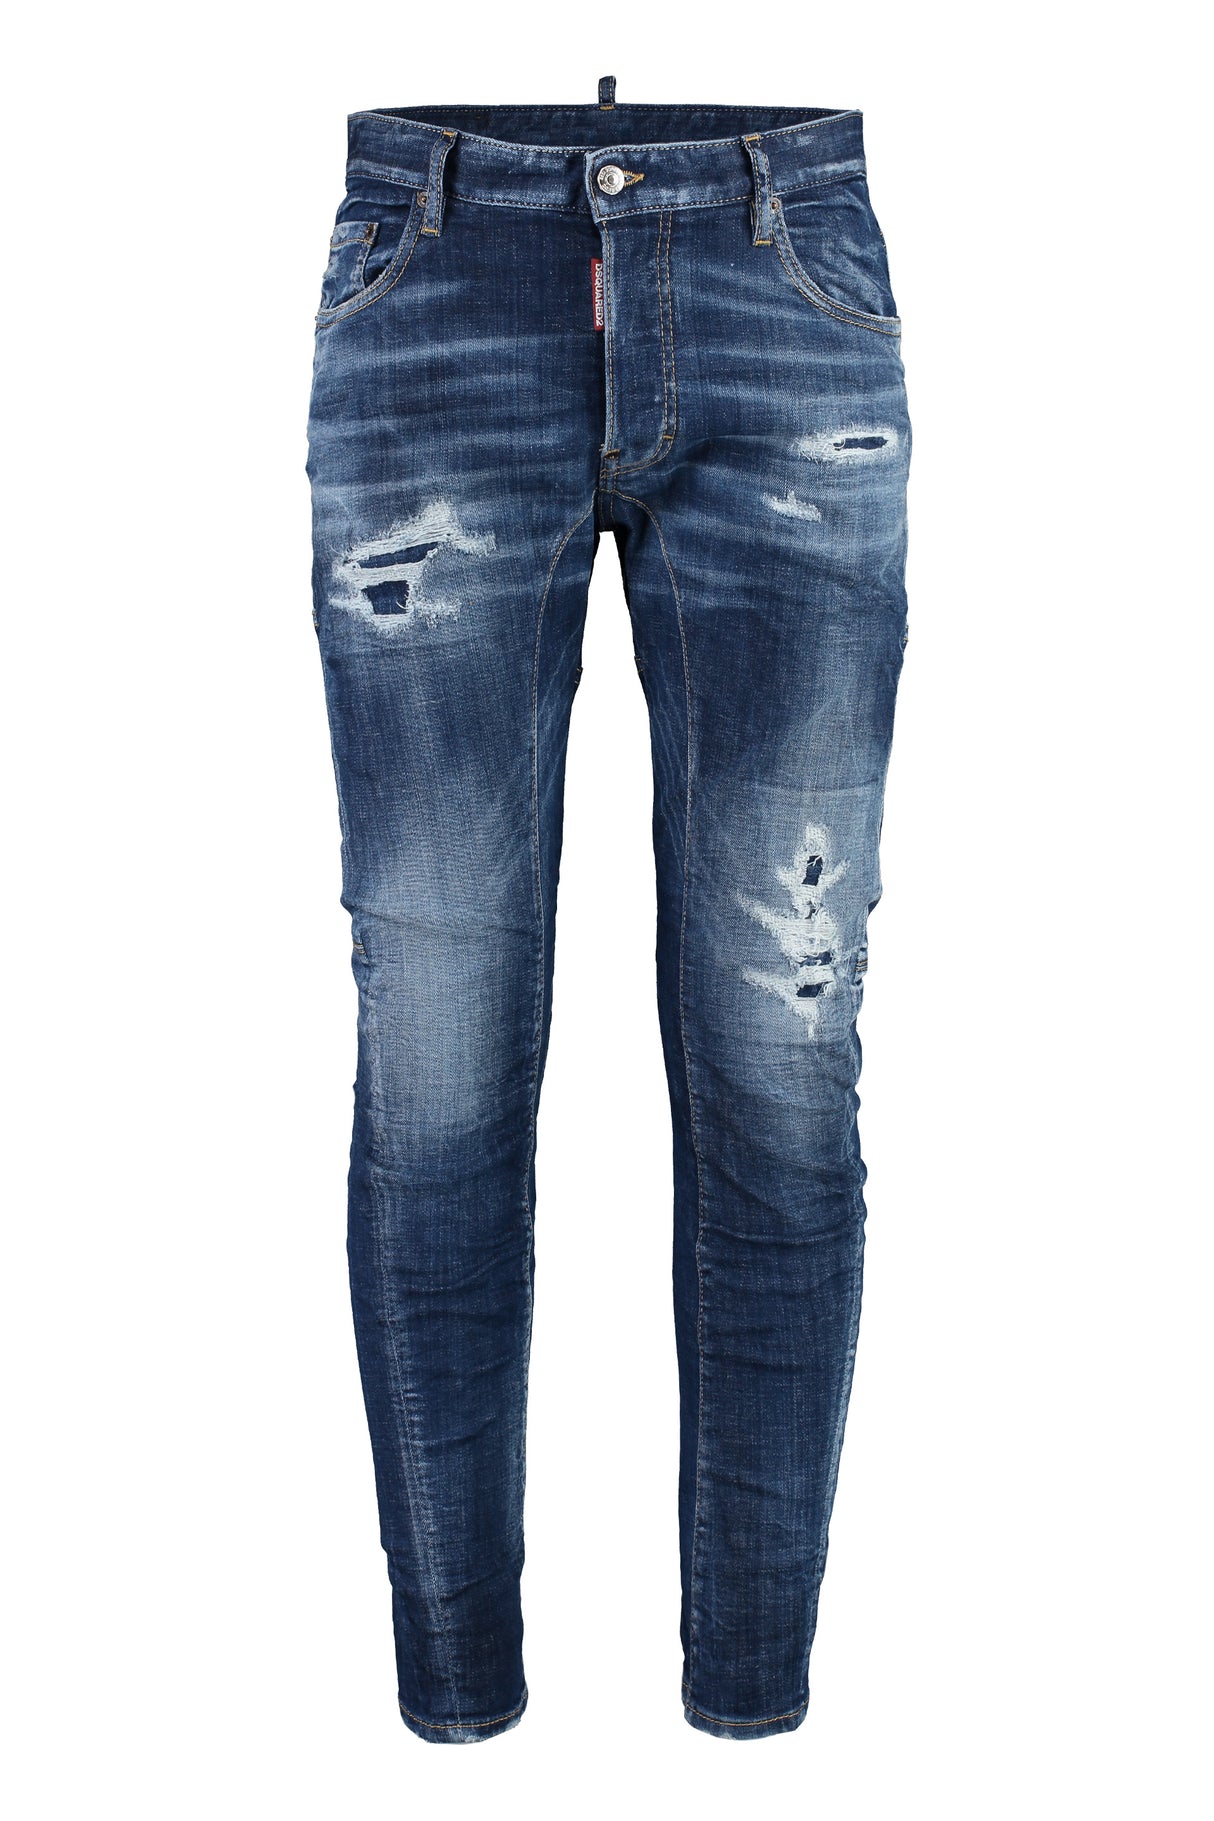 DSQUARED2 Men's Blue Distressed Jeans with Contrast Stitching and Leather Logo Patch